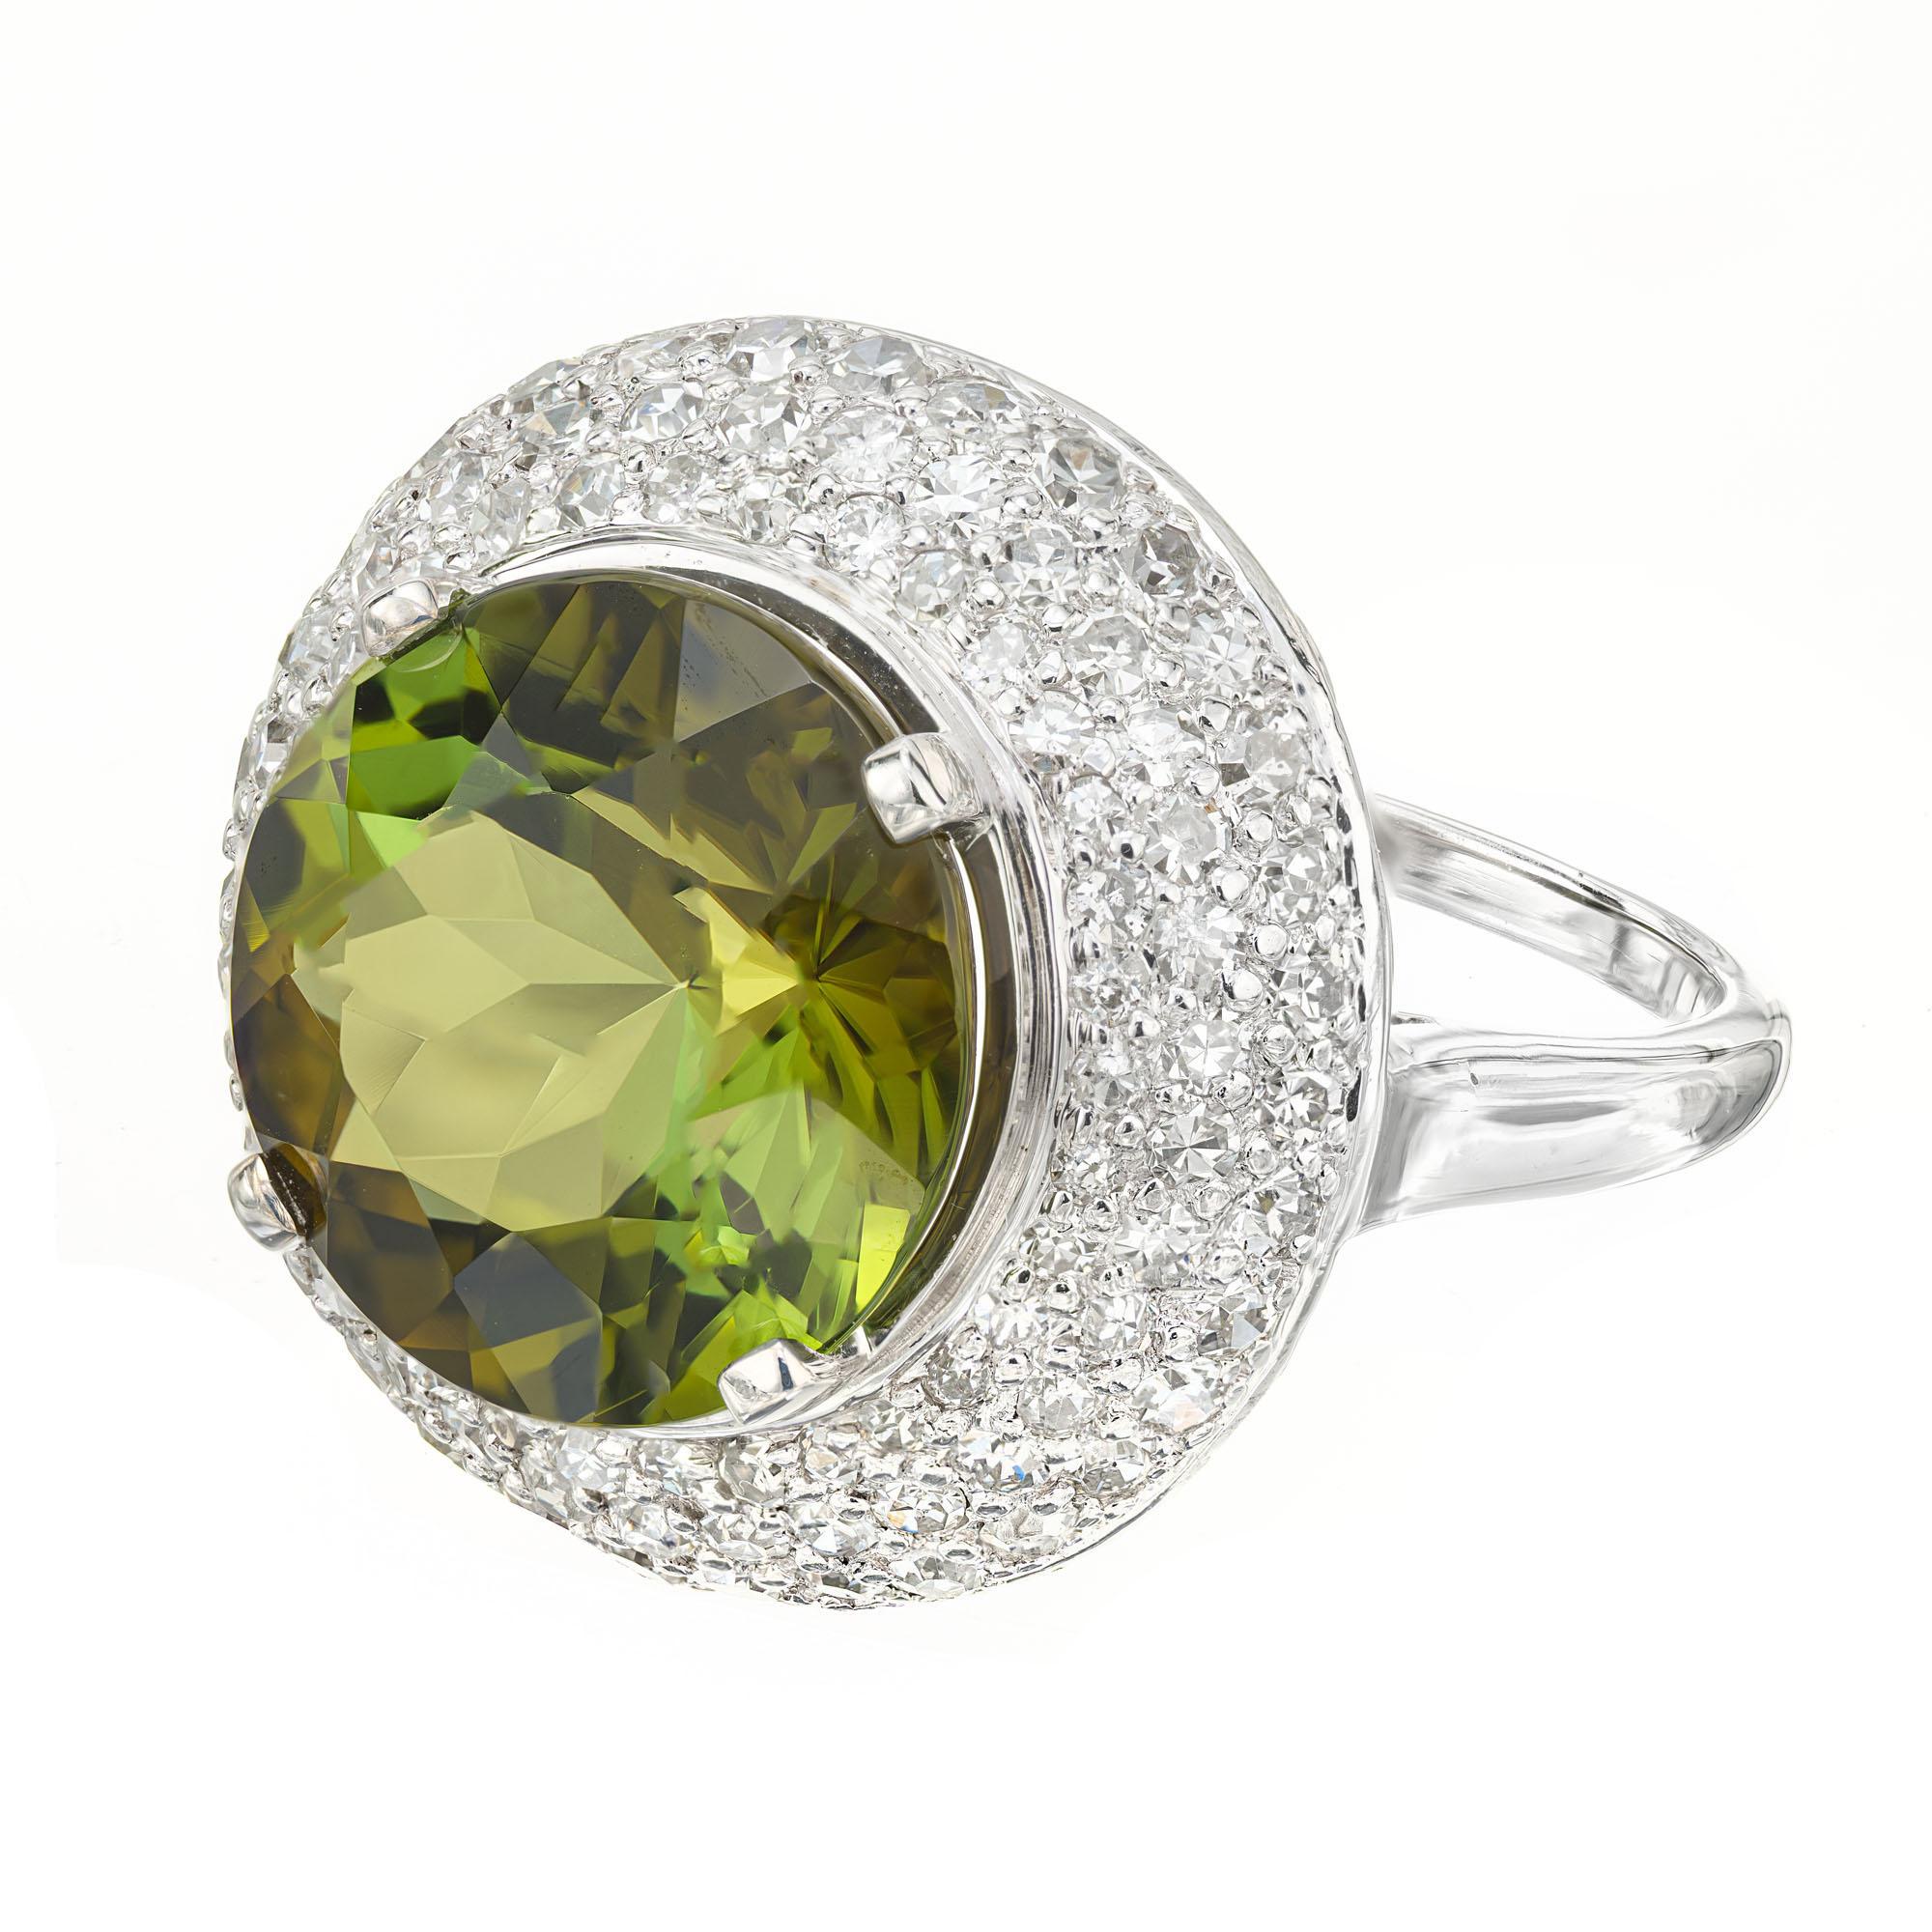 1950's mid-century Tourmaline and diamond cocktail ring. 6.90ct round center bi-color green tourmaline in a platinum setting with a halo of 96 diamonds, totaling 1.65cts. 

1 round green brown tourmaline, VS approx. 6.90cts
96 round diamonds, G-H